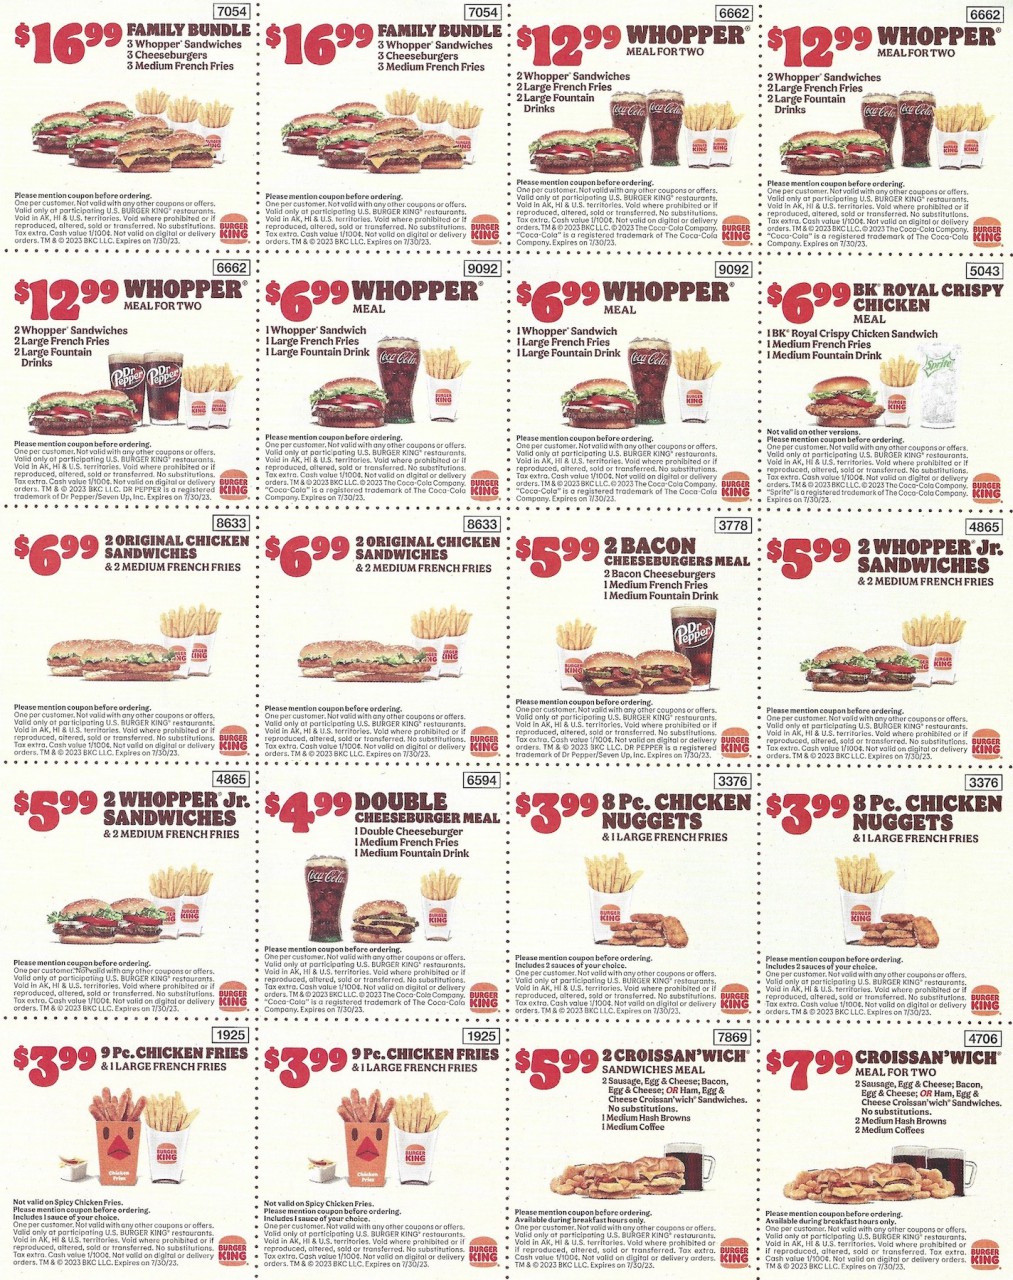 Burger King Coupons (SpiderVerse Whopper) Expires 07/30/2023